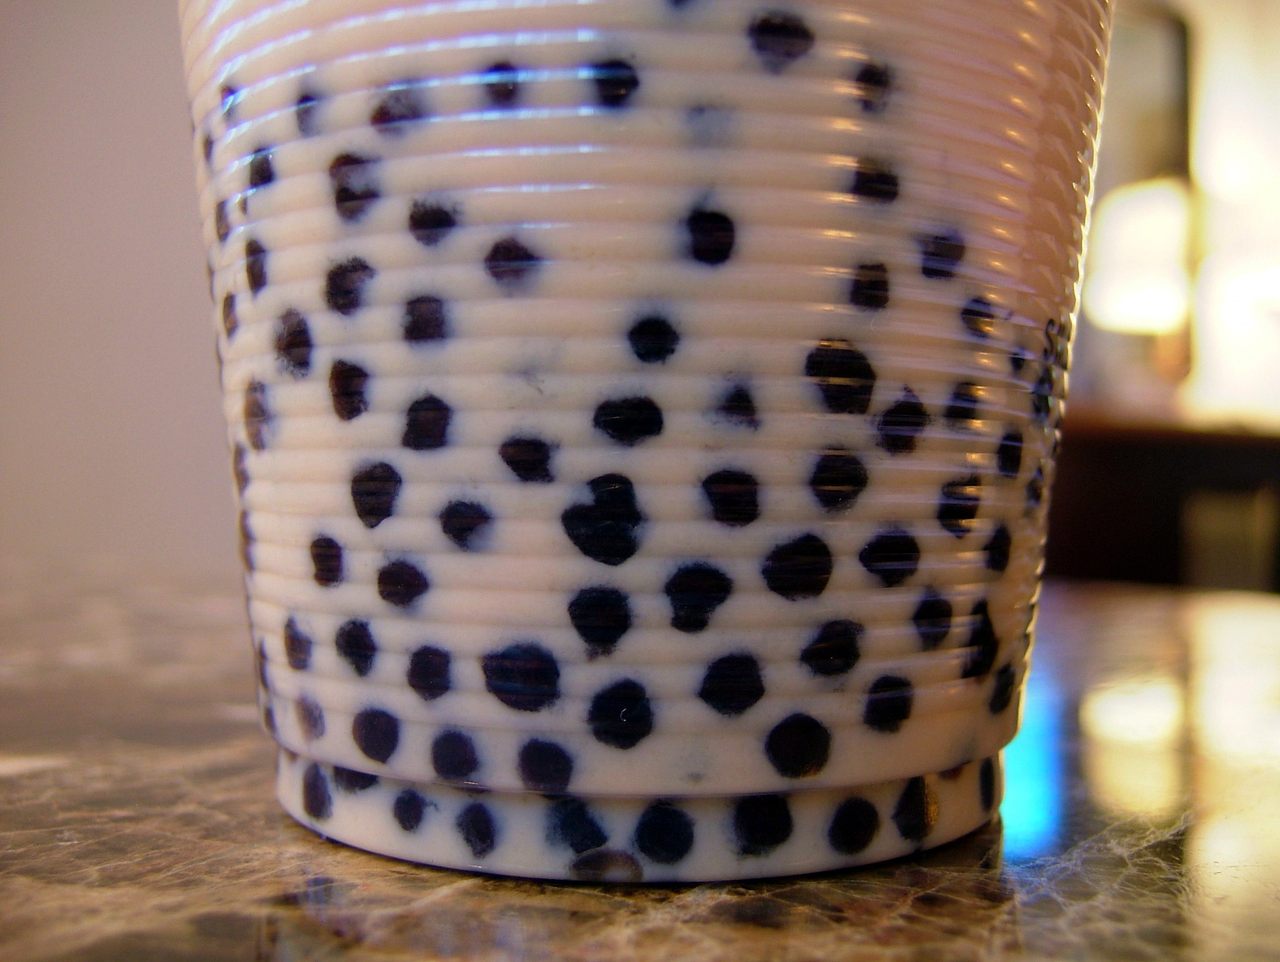 Milk tea is the usual accompaniment to boba pearls.